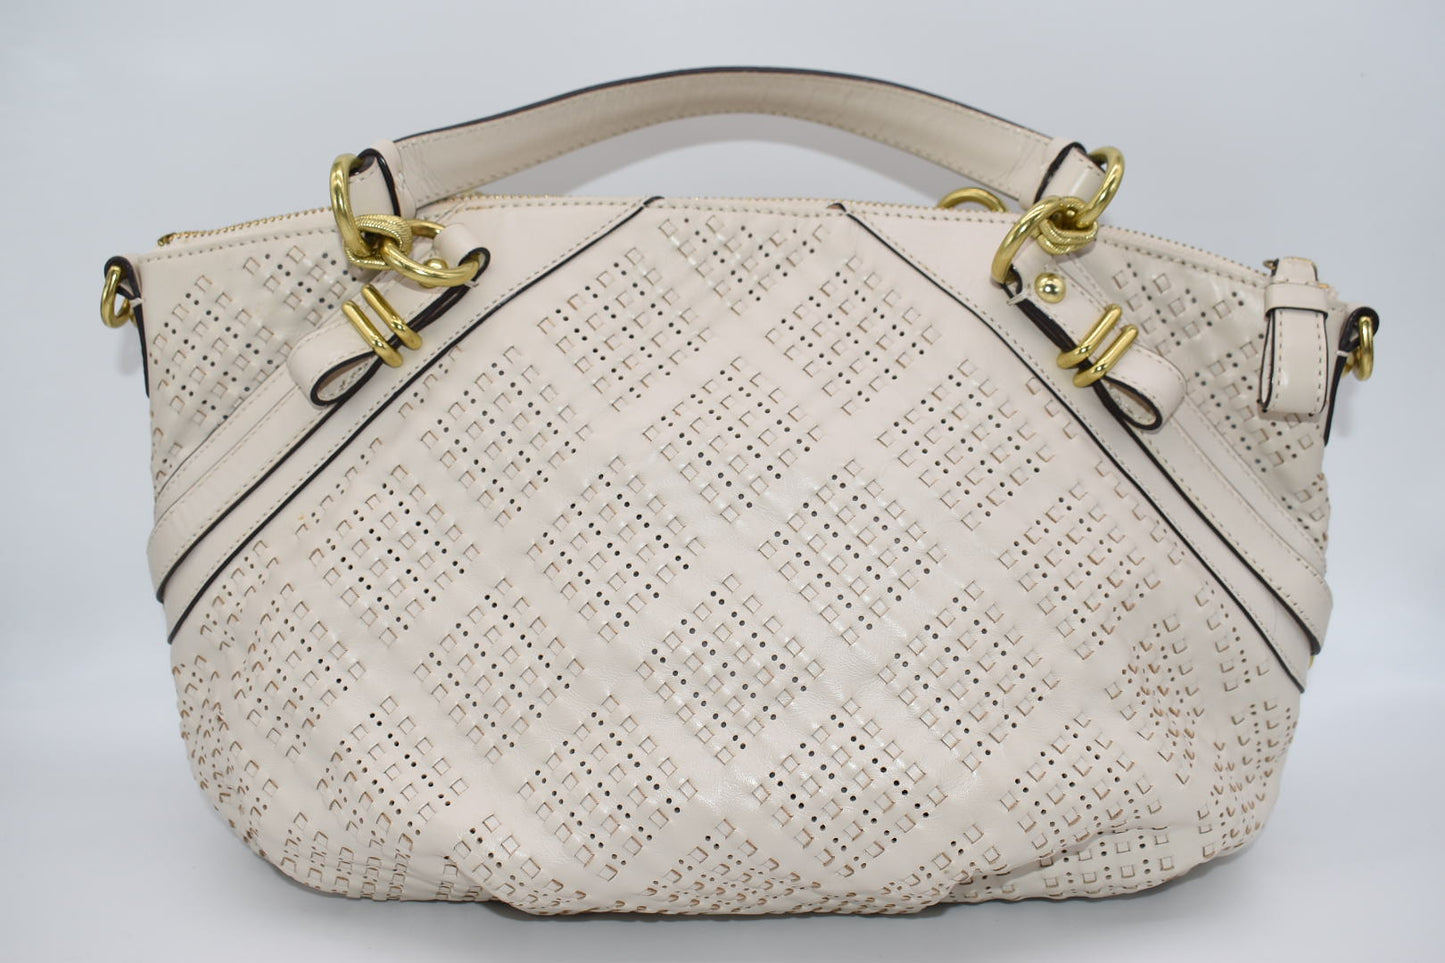 Coach Madison Sophia Satchel Bag in Woven Leather